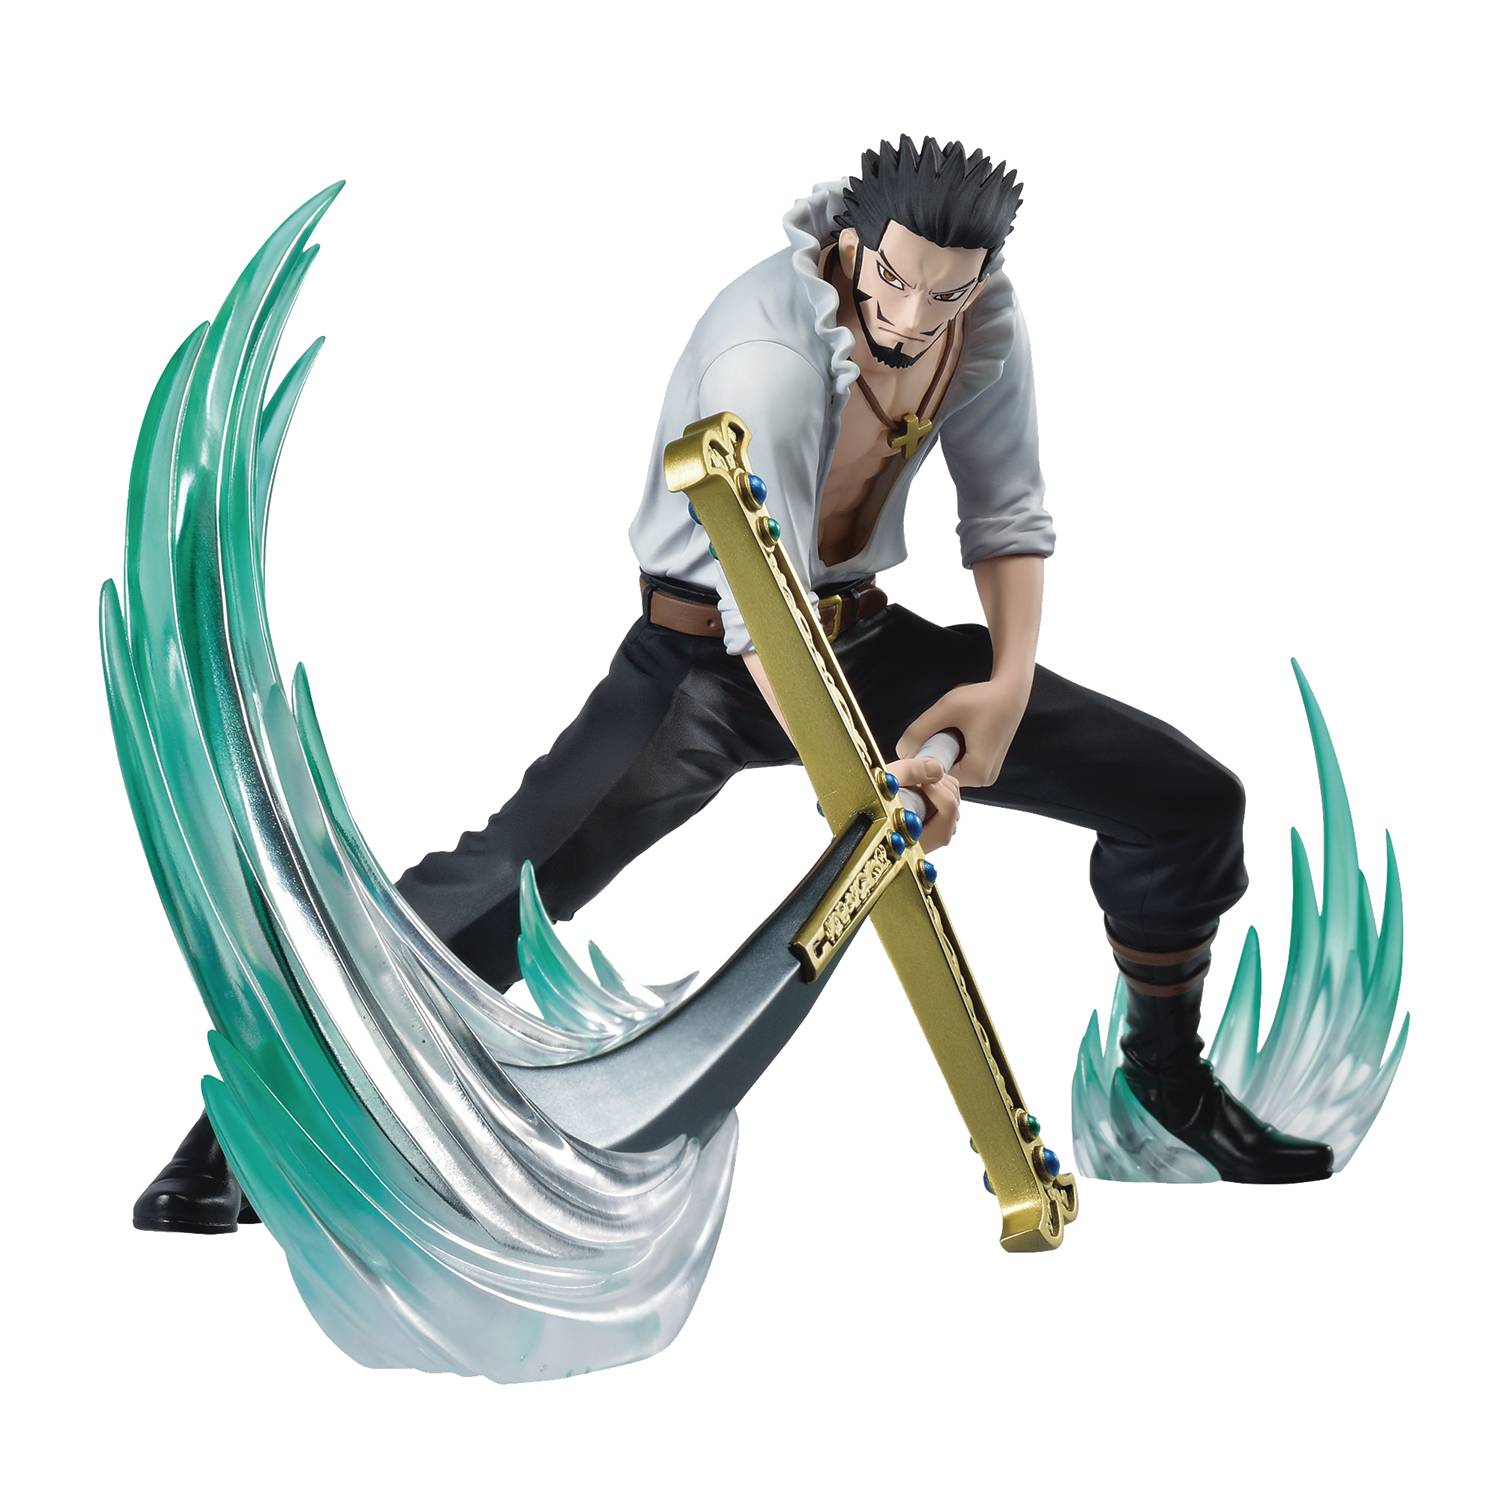 AUG229431 - ONE PIECE SPECIAL DRACULE MIHAWK DXF FIG - Previews World